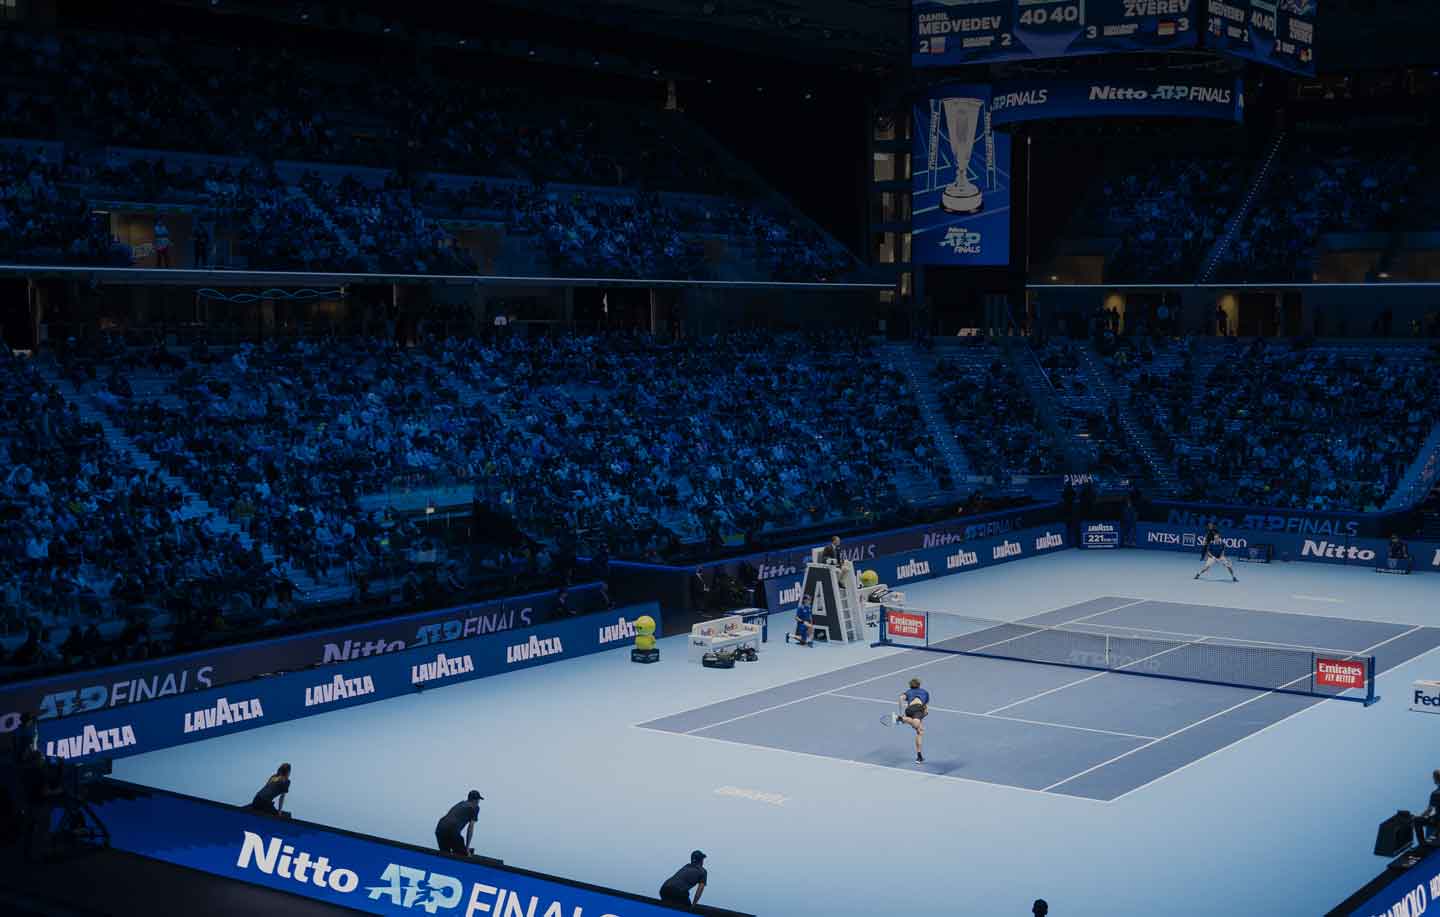 Lavazza and tennis: the perfect match